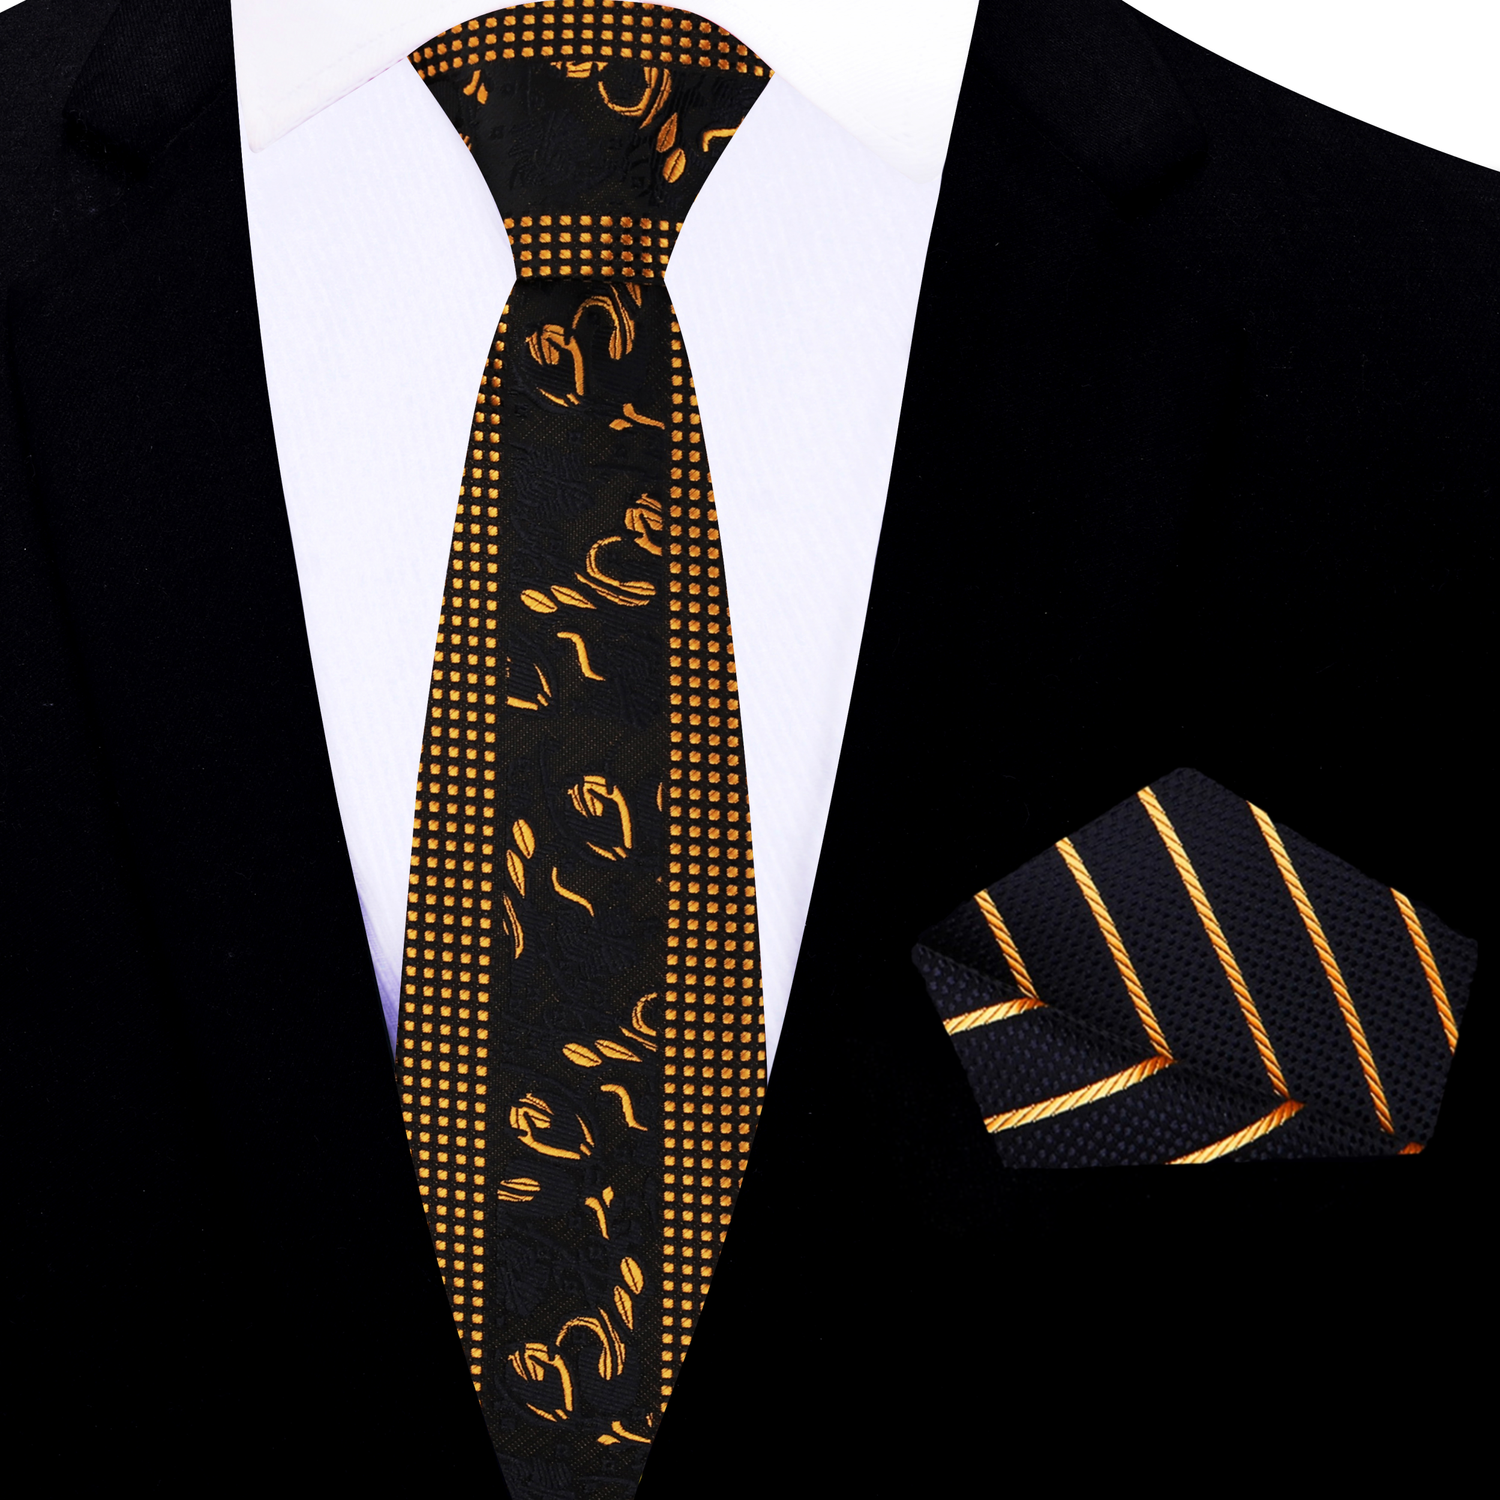 Thin Tie: Black & Gold Floral and Check Necktie with Black, Gold Stripe Square